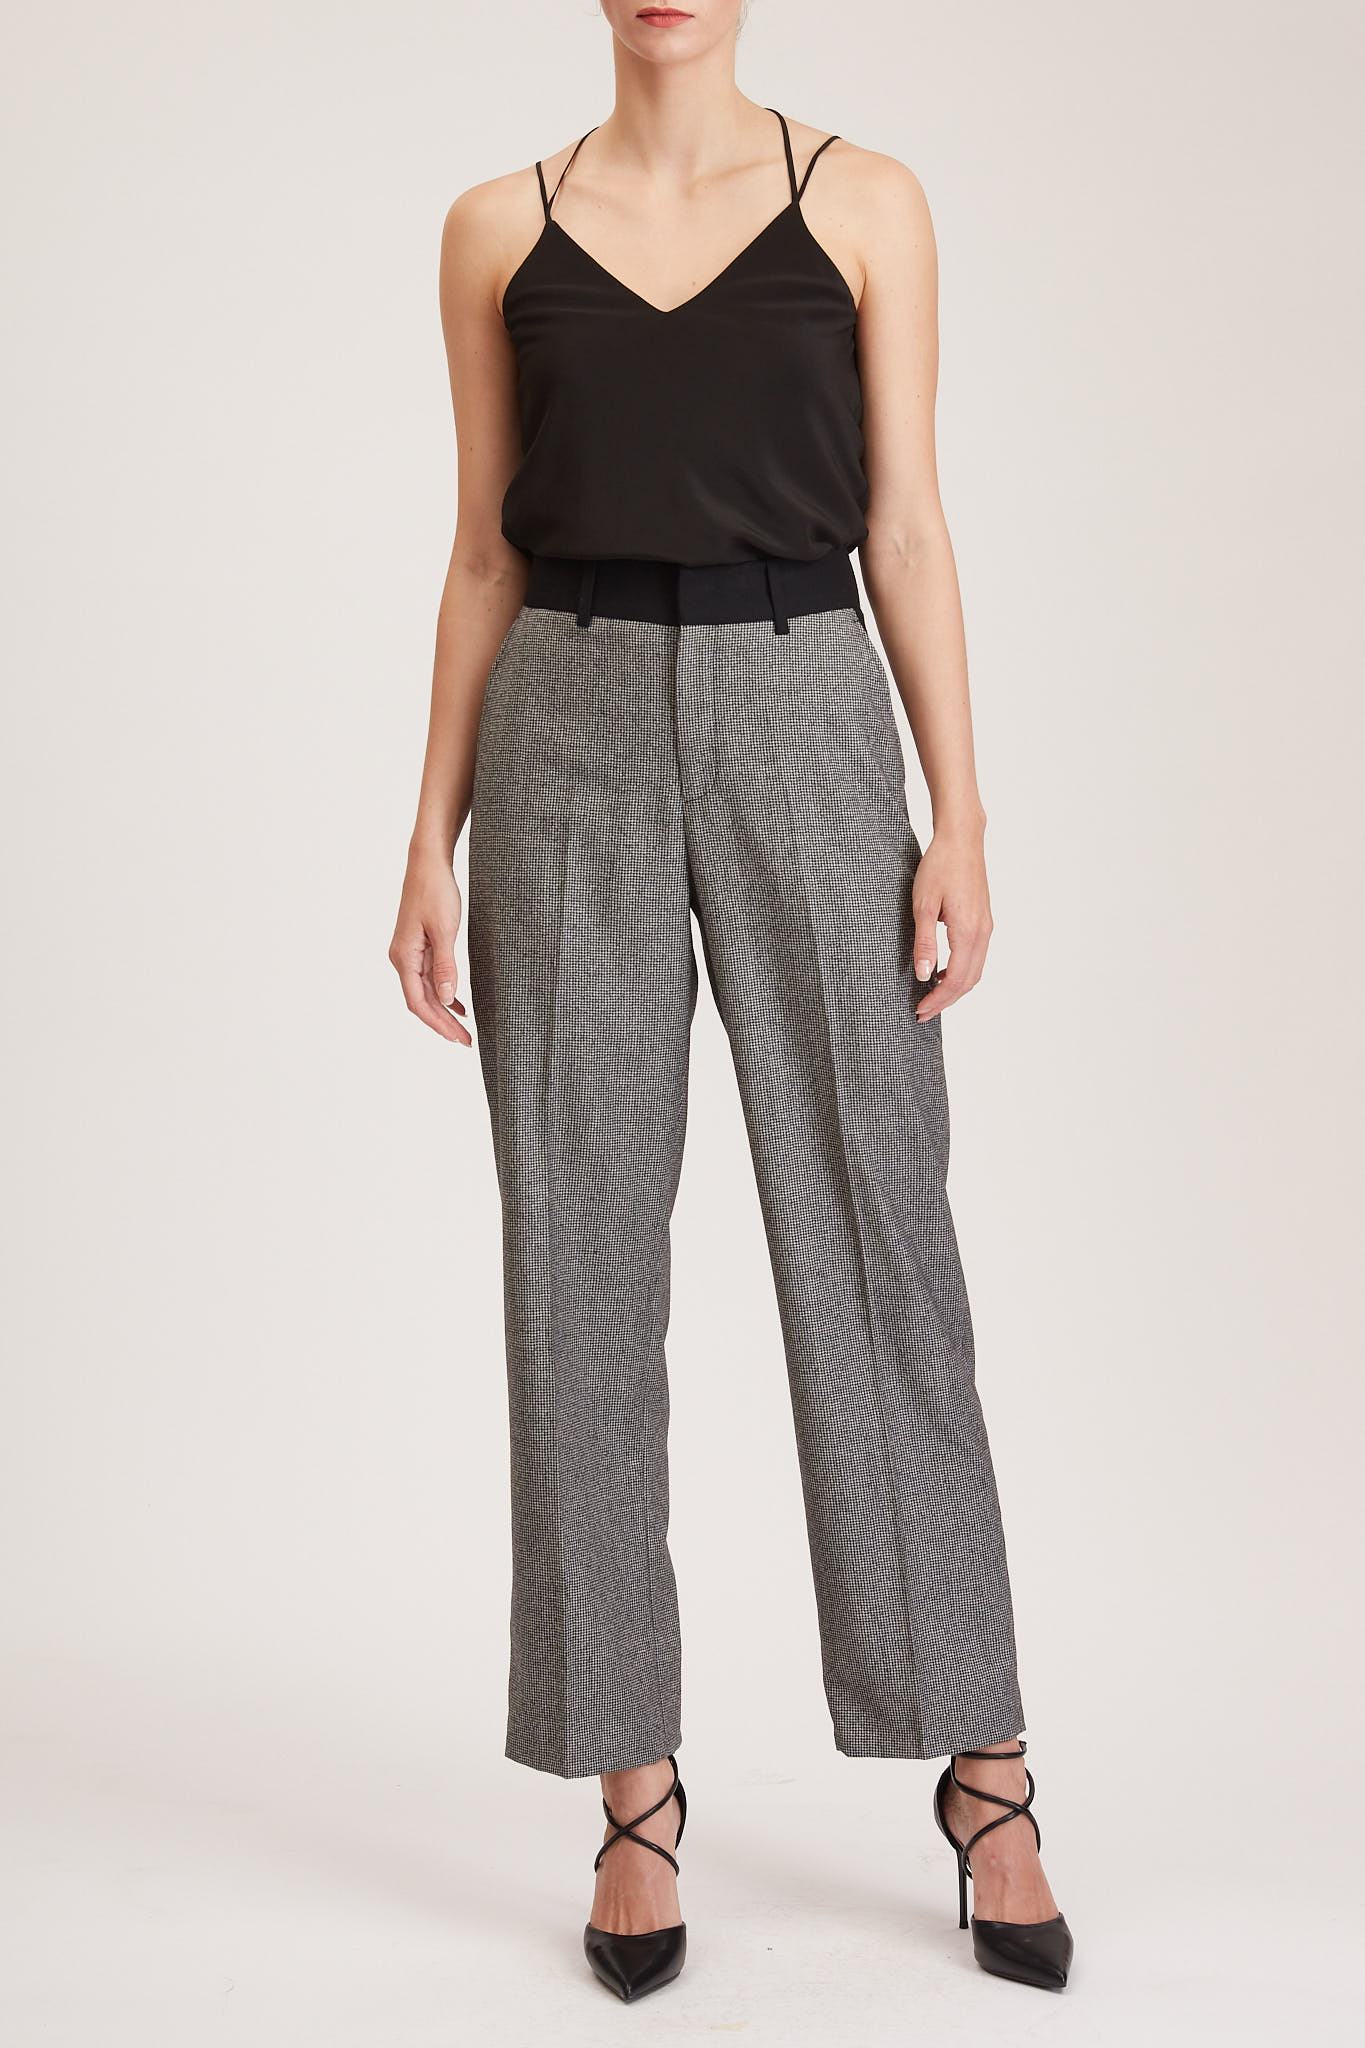 Manchester Trouser – High-waisted cropped trousers in black houndstooth